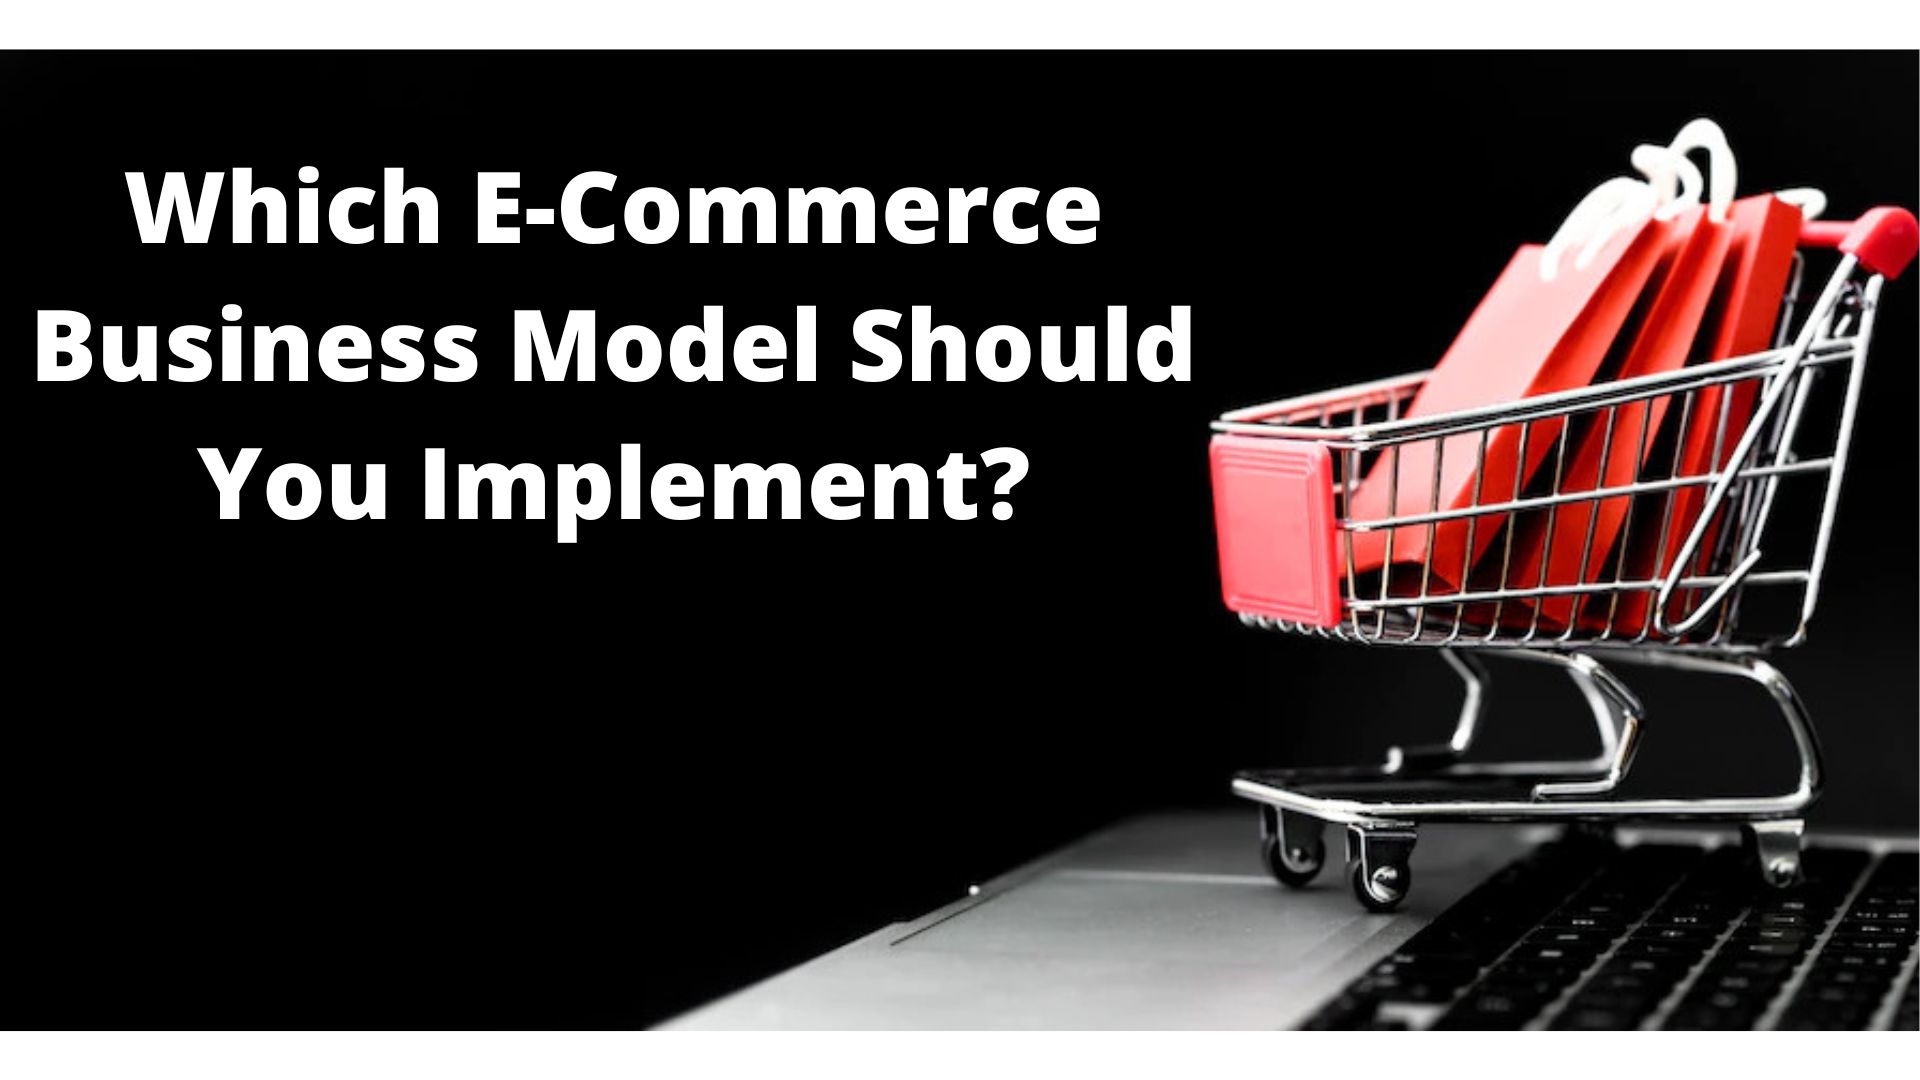 Which E-Commerce Business Model Should You Implement?